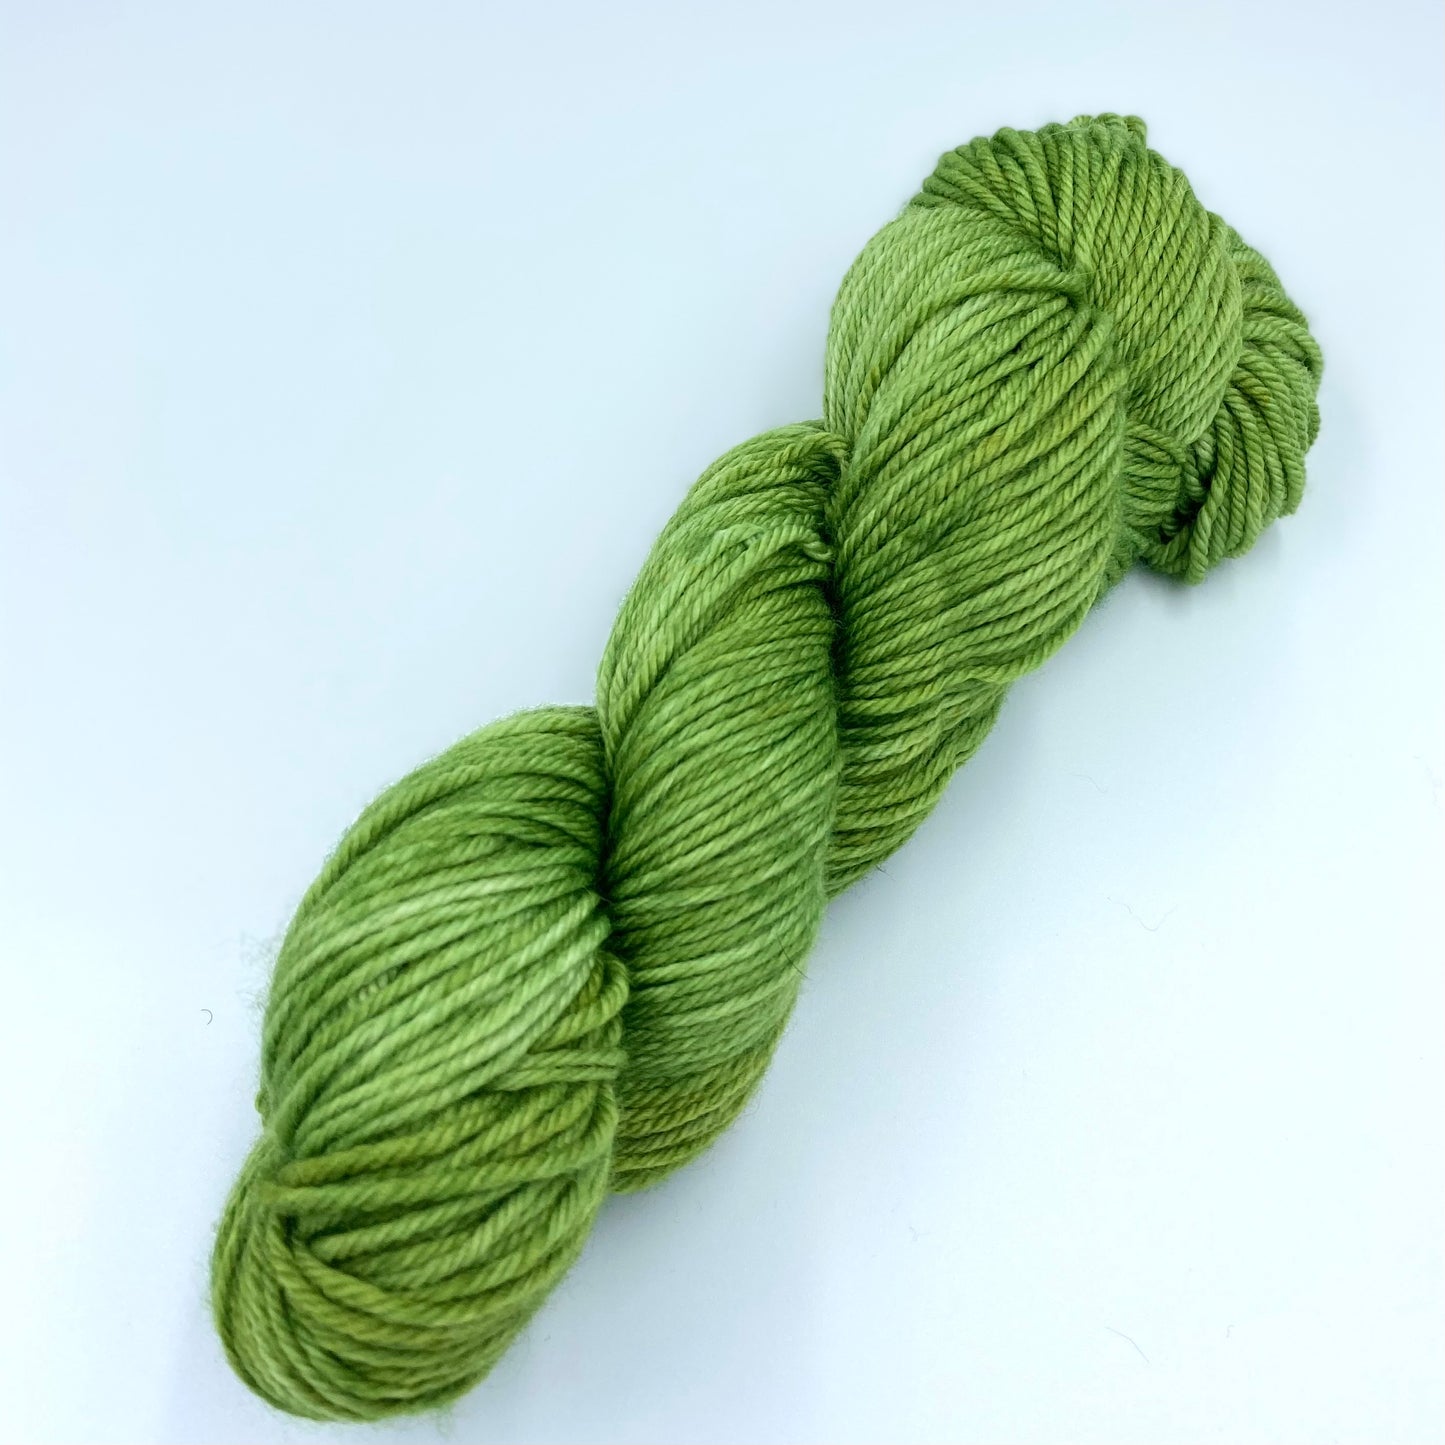 Skein of superwash merino yarn hand dyed in an army green color